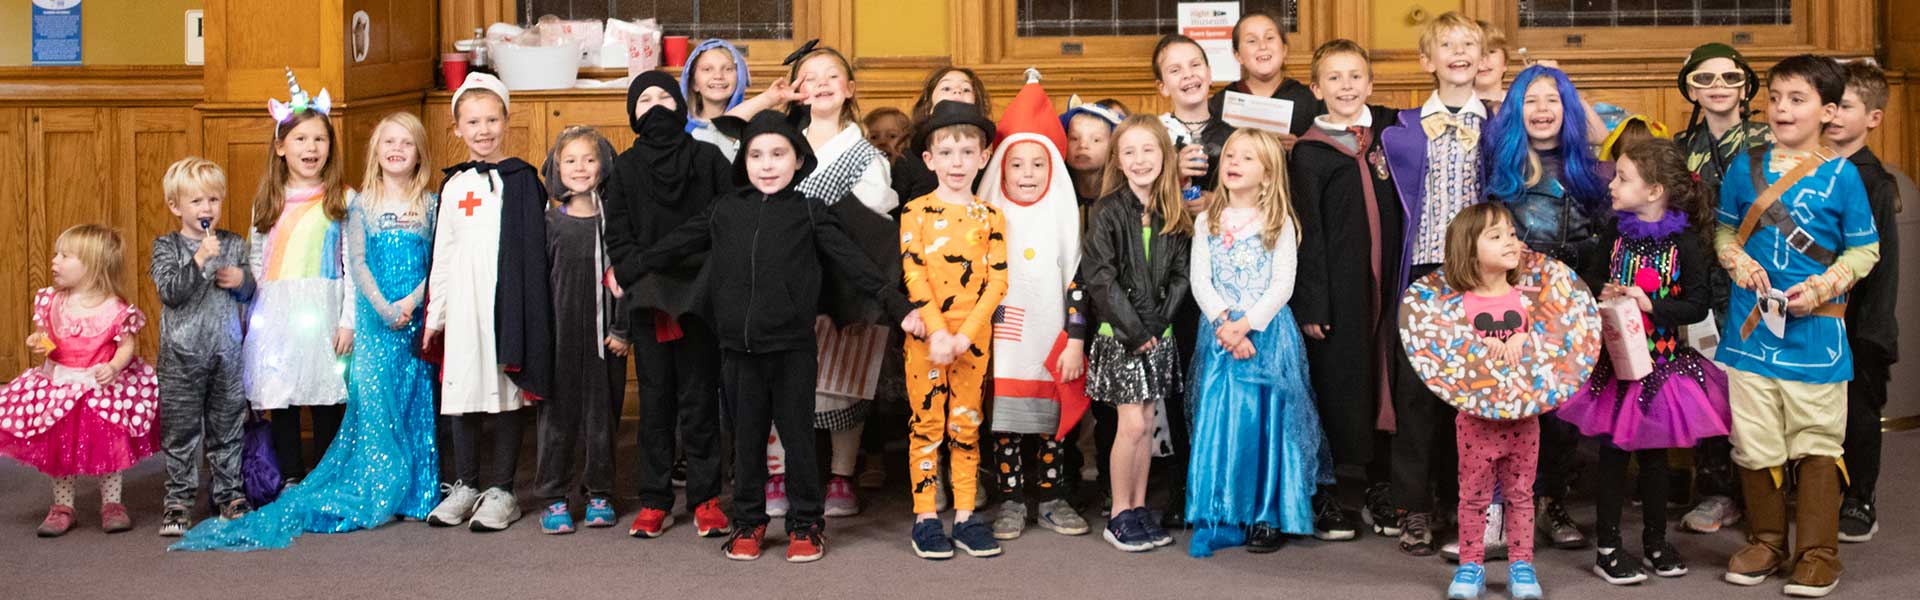 Children dressed in halloween costumes during the Night at the Museum event